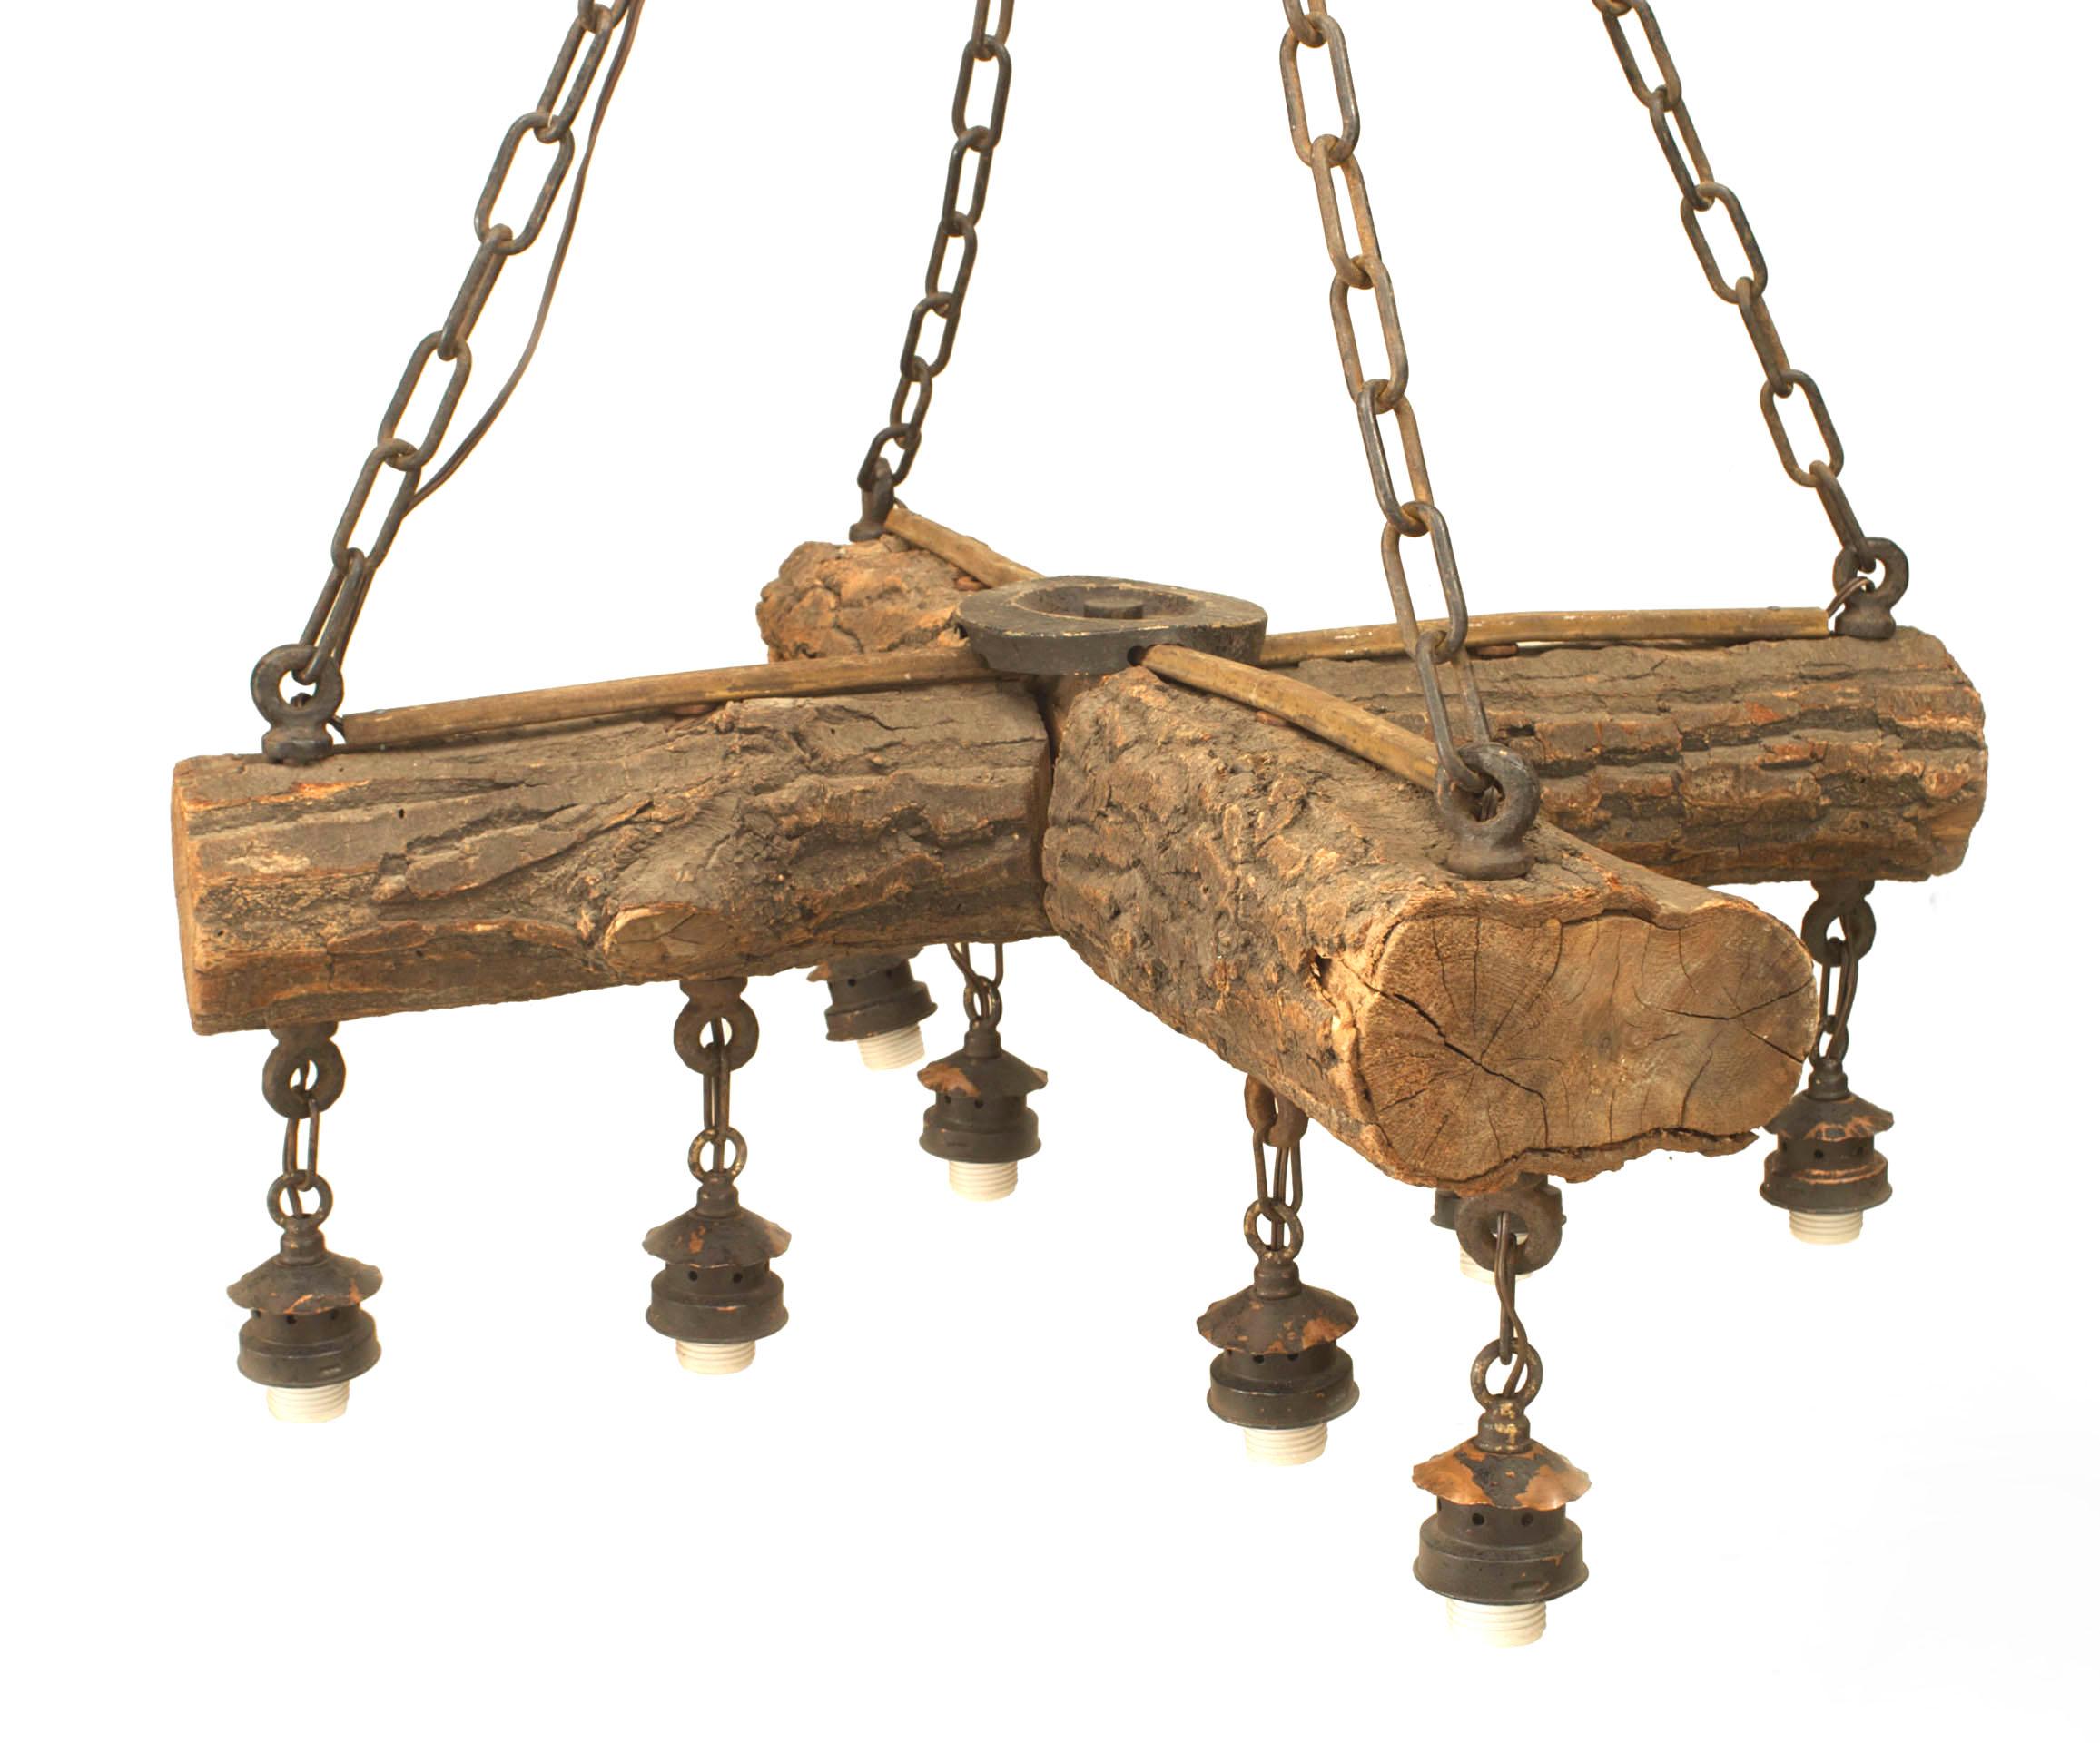 Rustic Adirondack-style (1st Quarter 20th Century) chandelier with two crossed logs supporting 8 drop lights and 4 iron chains connected to a canopy.
